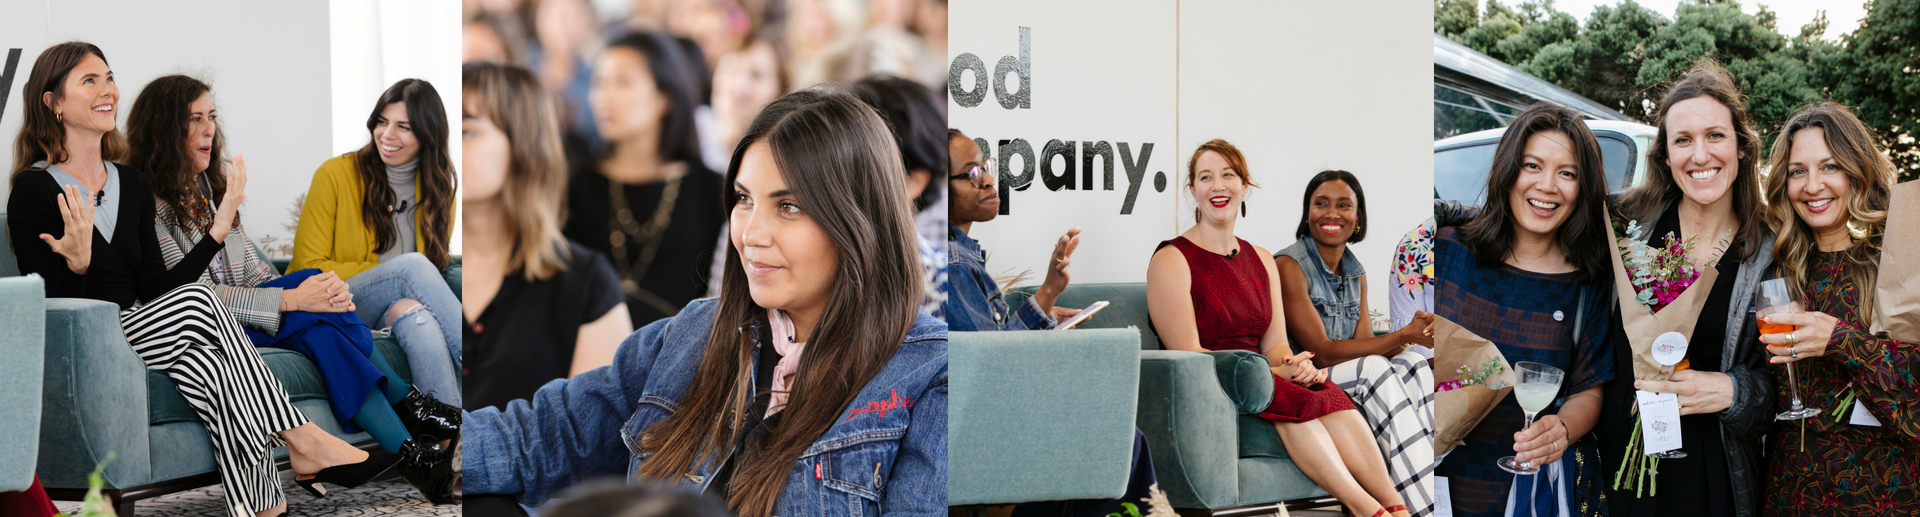 Schedule 2017 header for in good company conference - women sitting, talking, as speaker, as guests